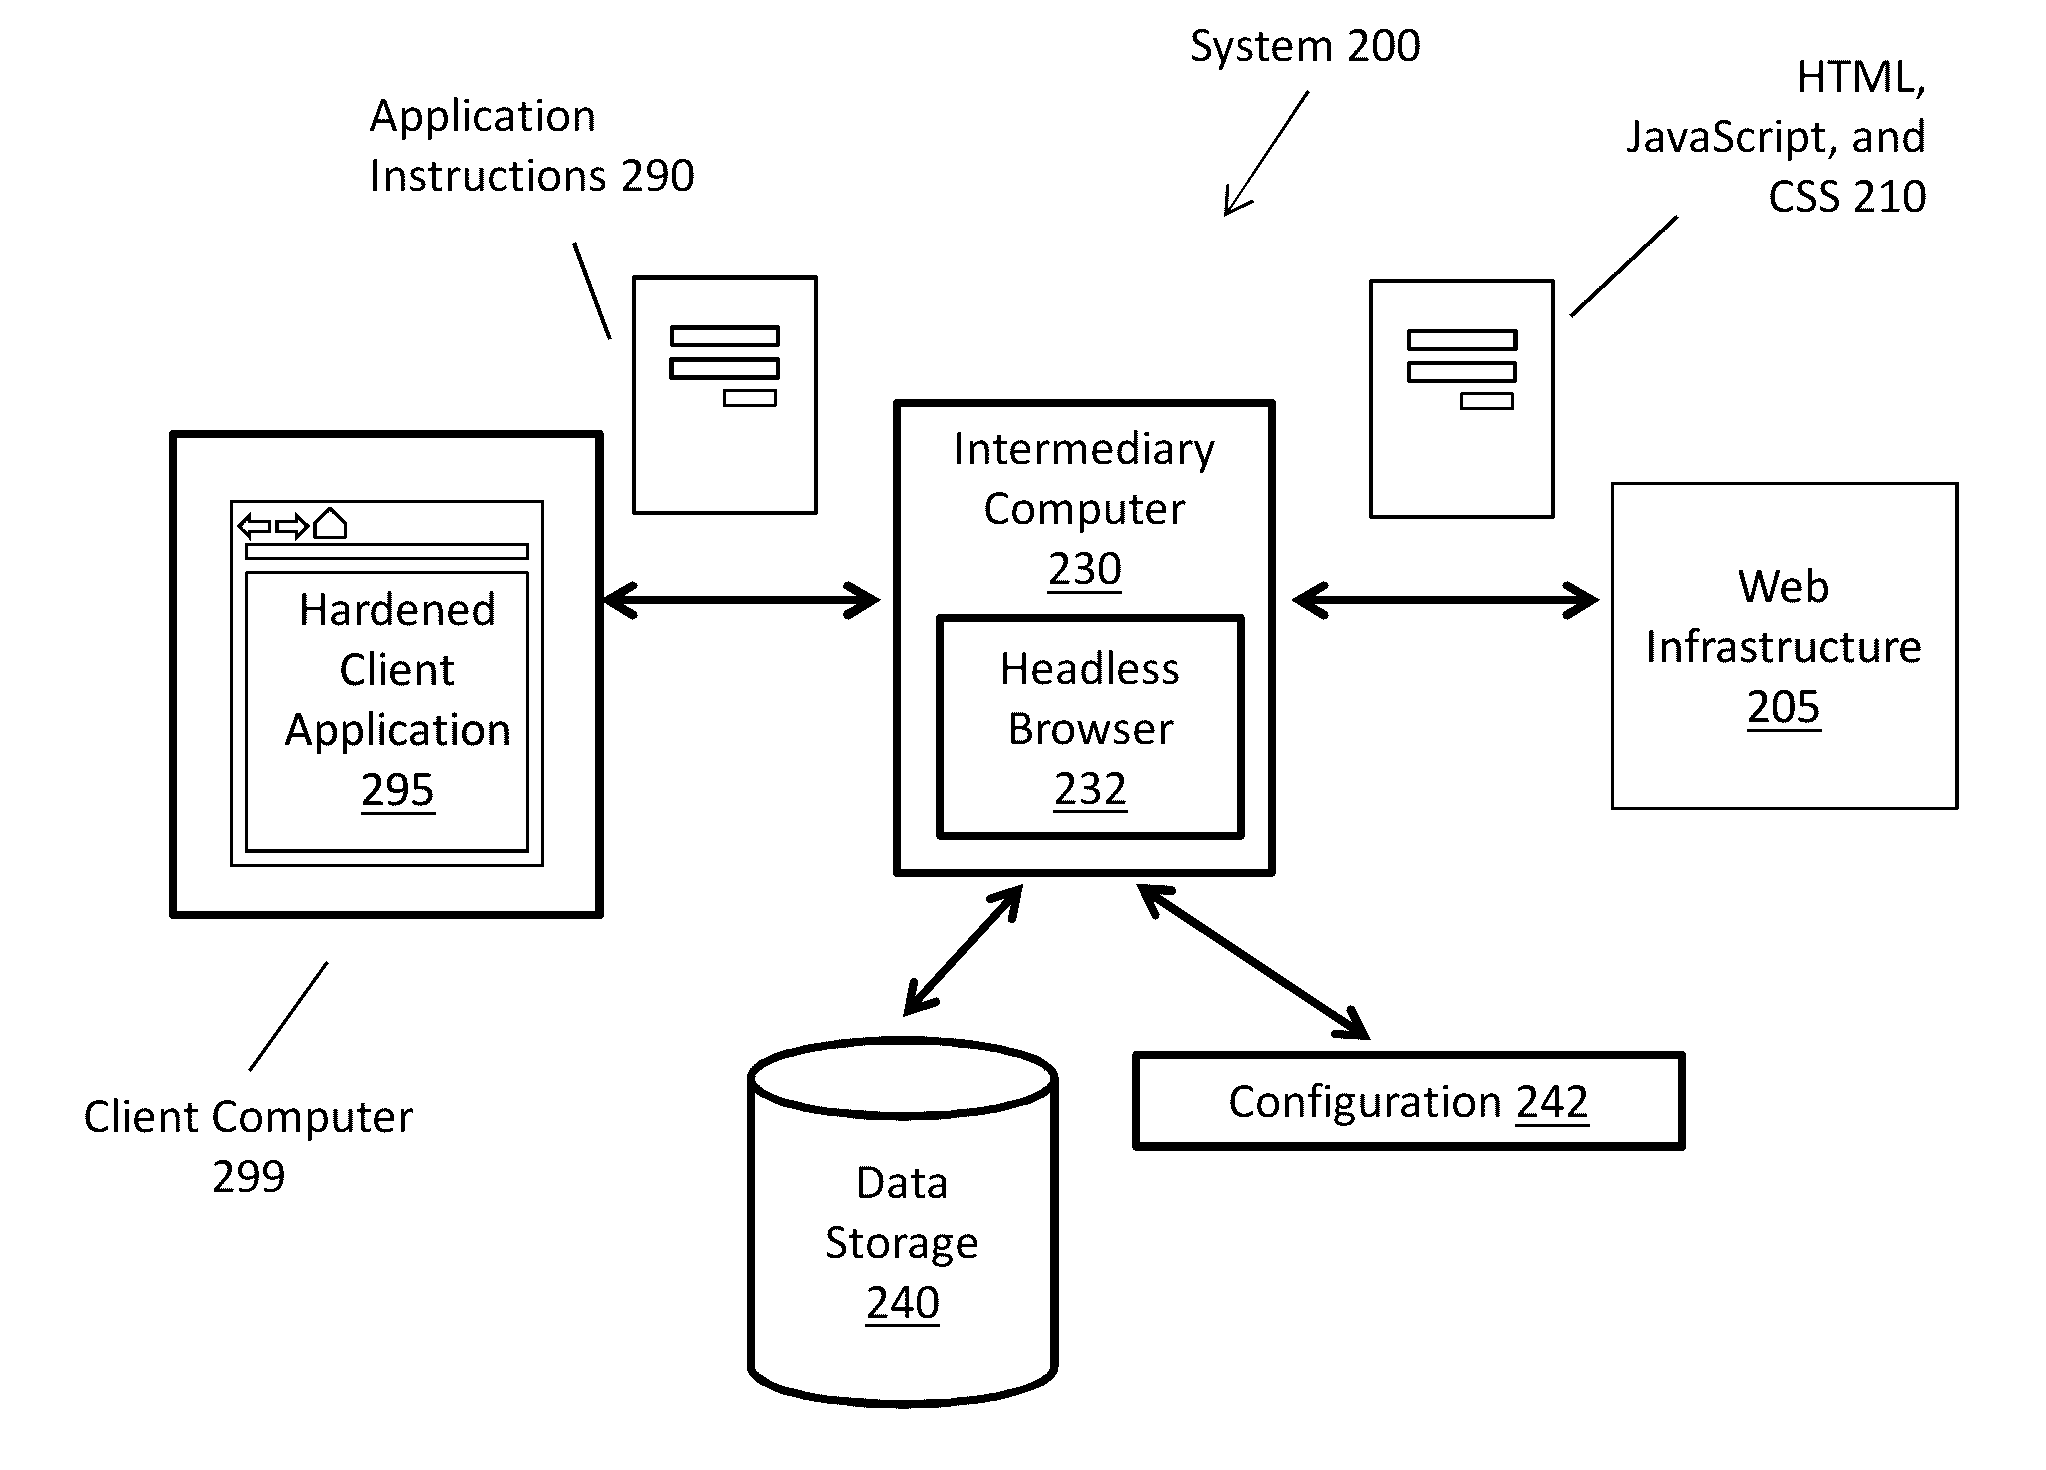 Client/server security by an intermediary executing instructions received from a server and rendering client application instructions